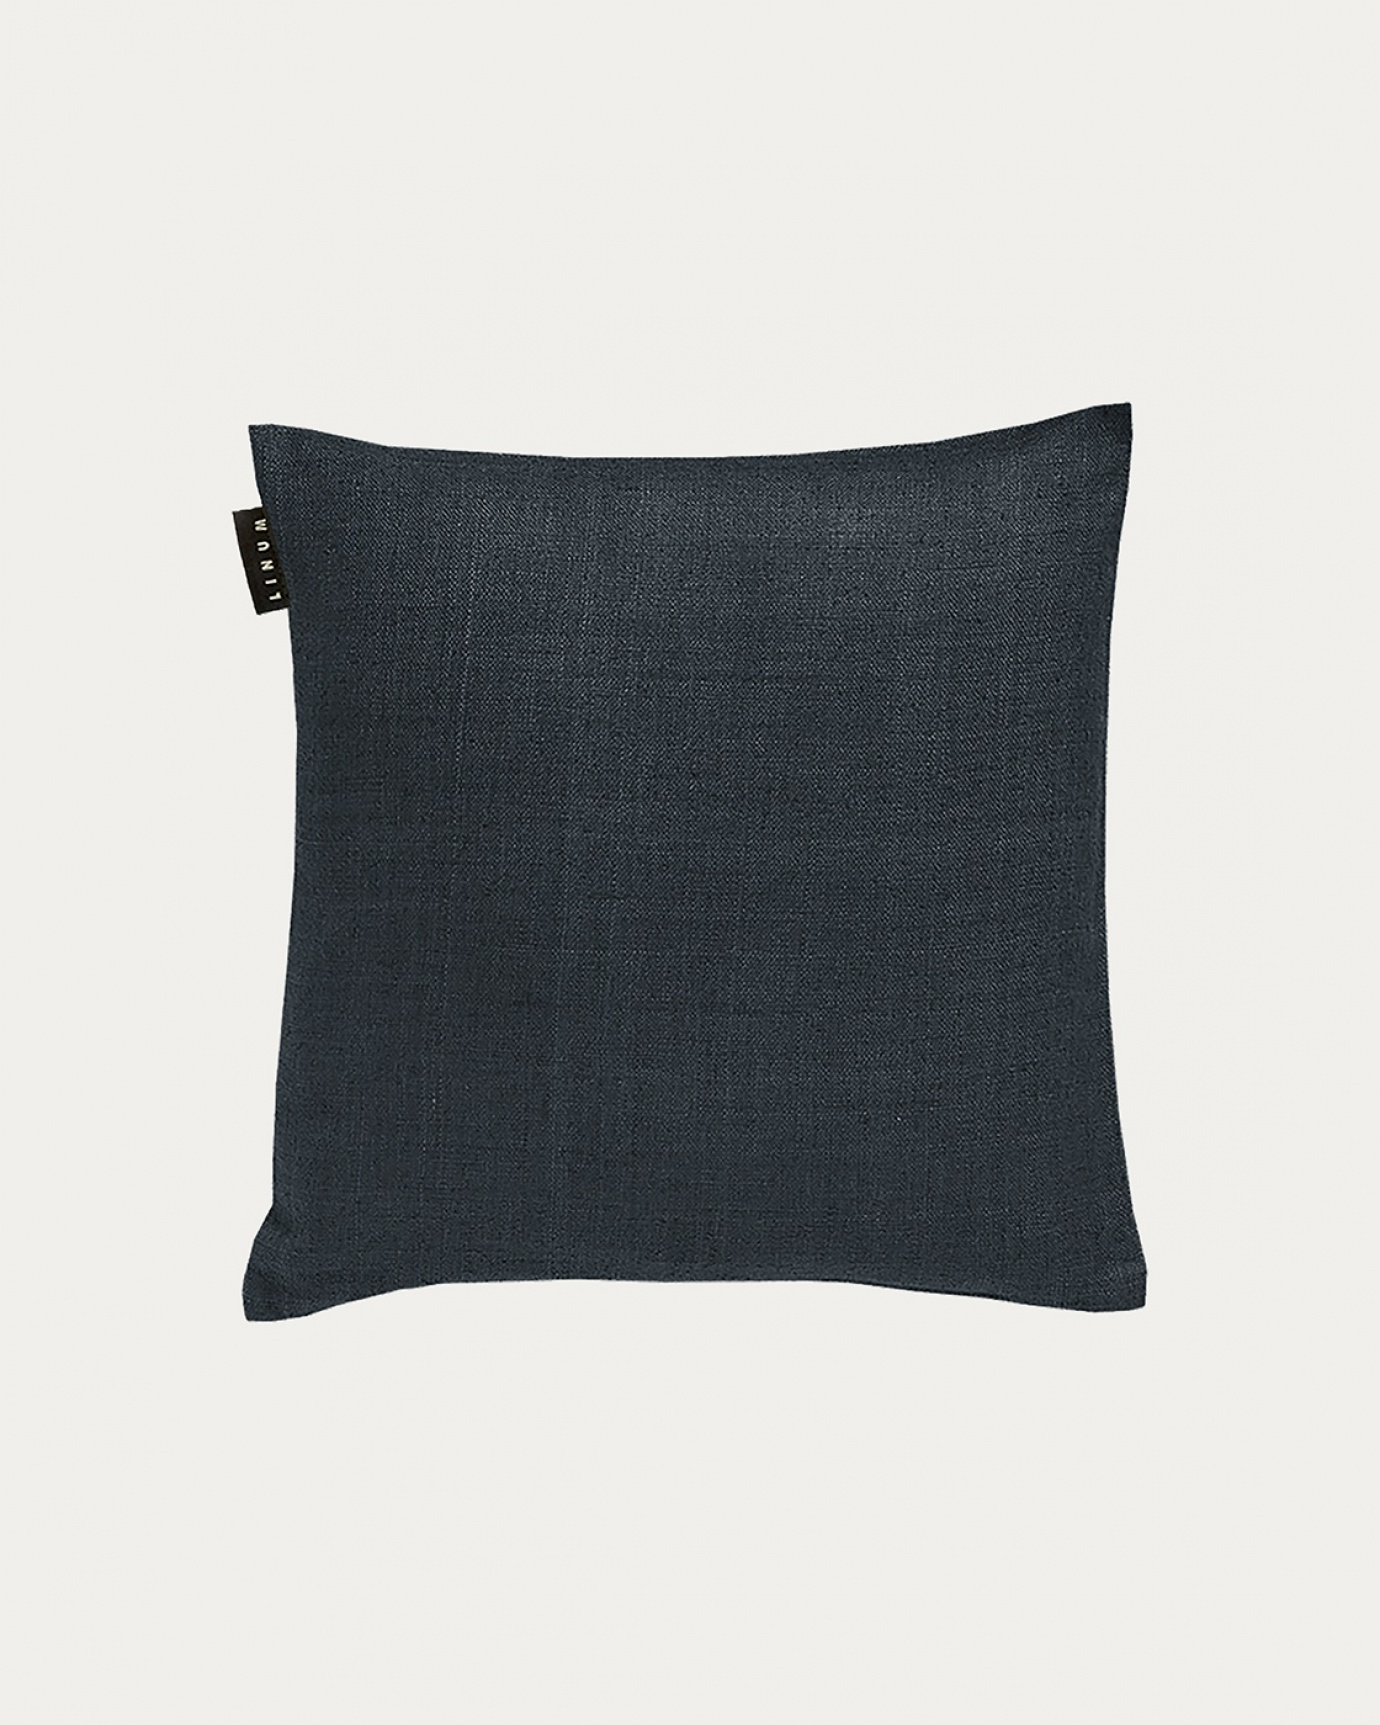 Product image ink blue SETA cushion cover made of 100% raw silk that gives a nice lustre from LINUM DESIGN. Size 40x40 cm.